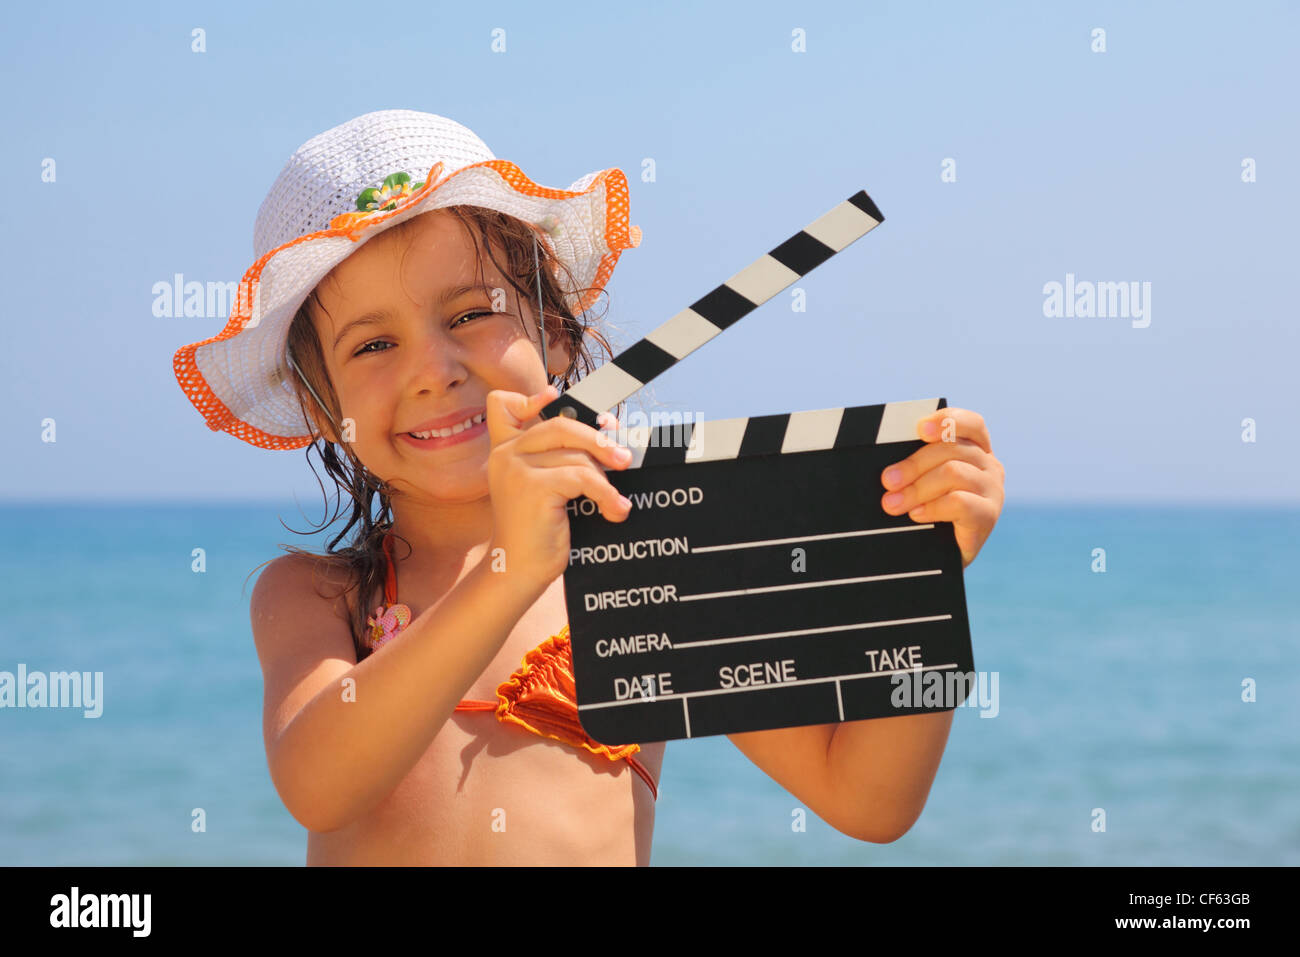 beautiful little girl standing on beach and holding clapboard. focus on girl eyes Stock Photo